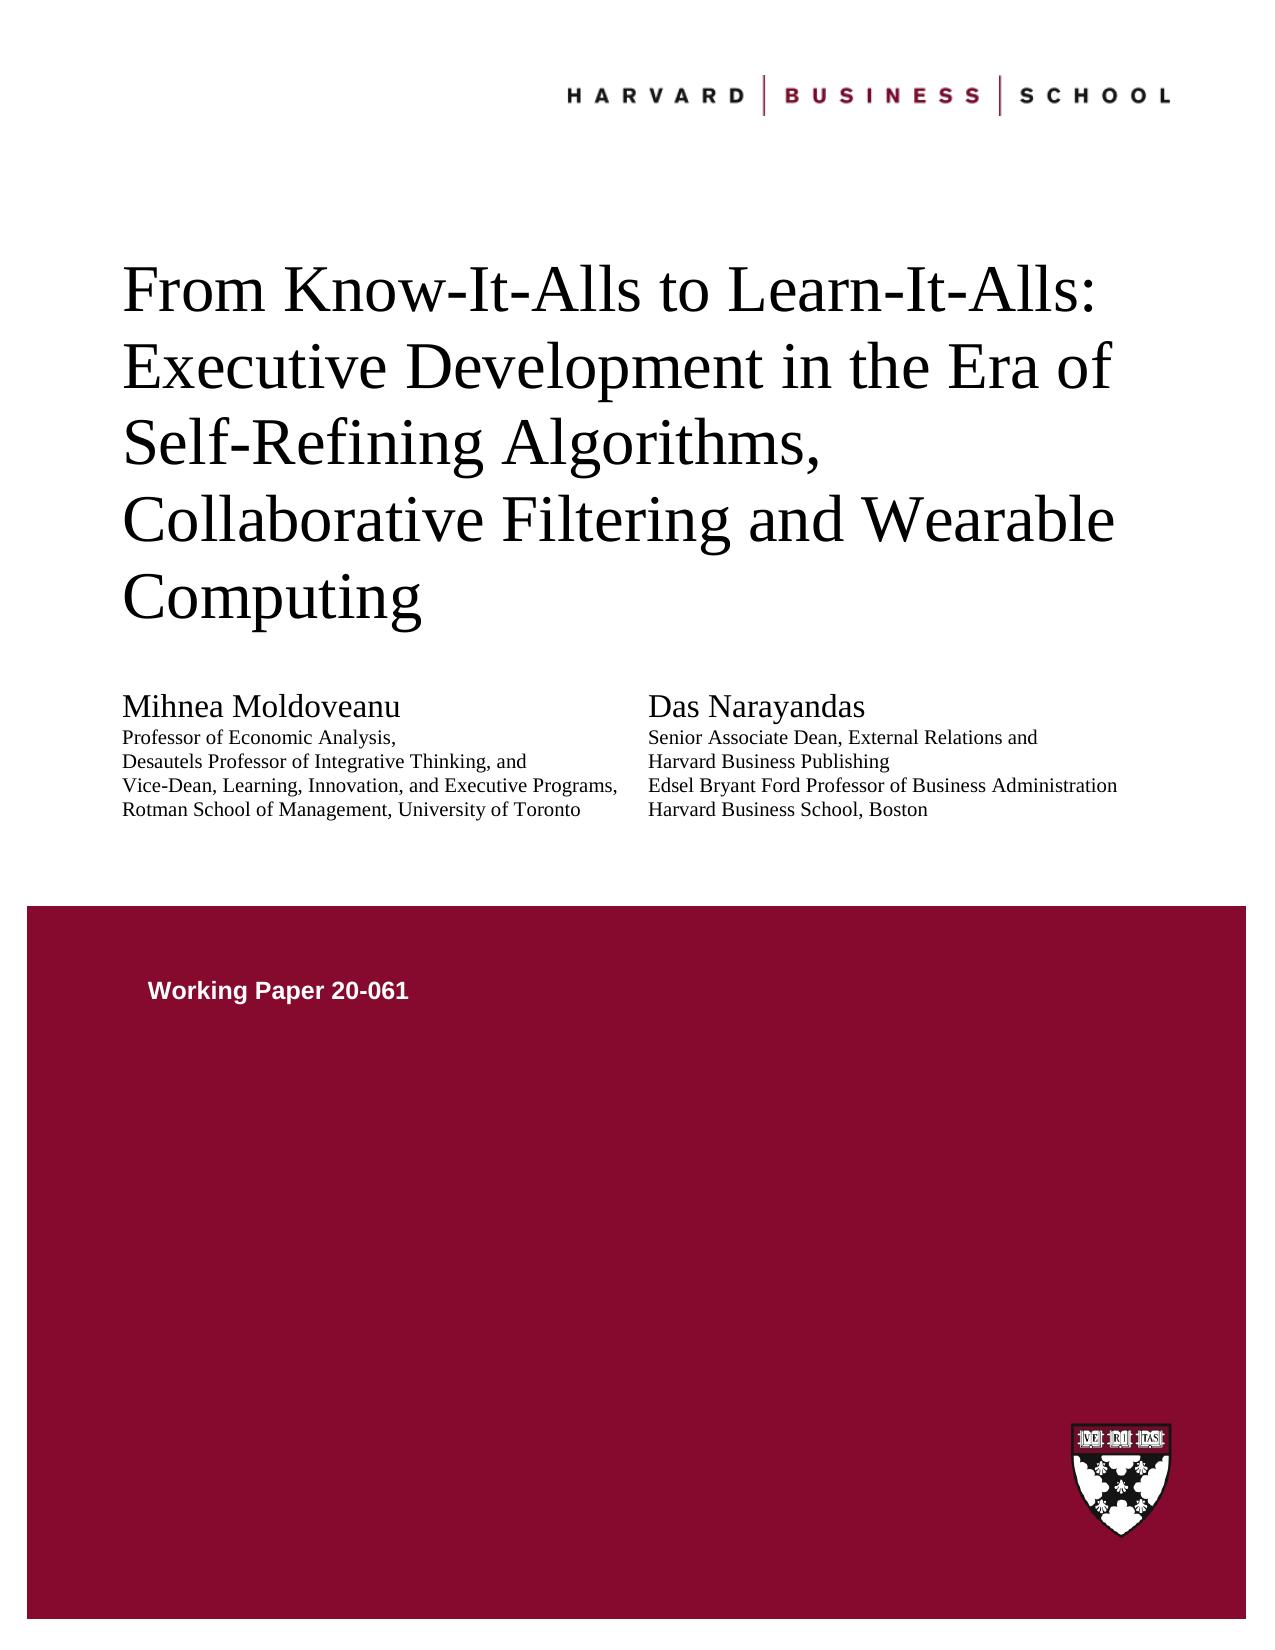 From Know-It-Alls to Learn-It-Alls - Executive Development in the Era of Self-Refining Algorithms, Collaborative Filtering and Wearable Computing (Paper)